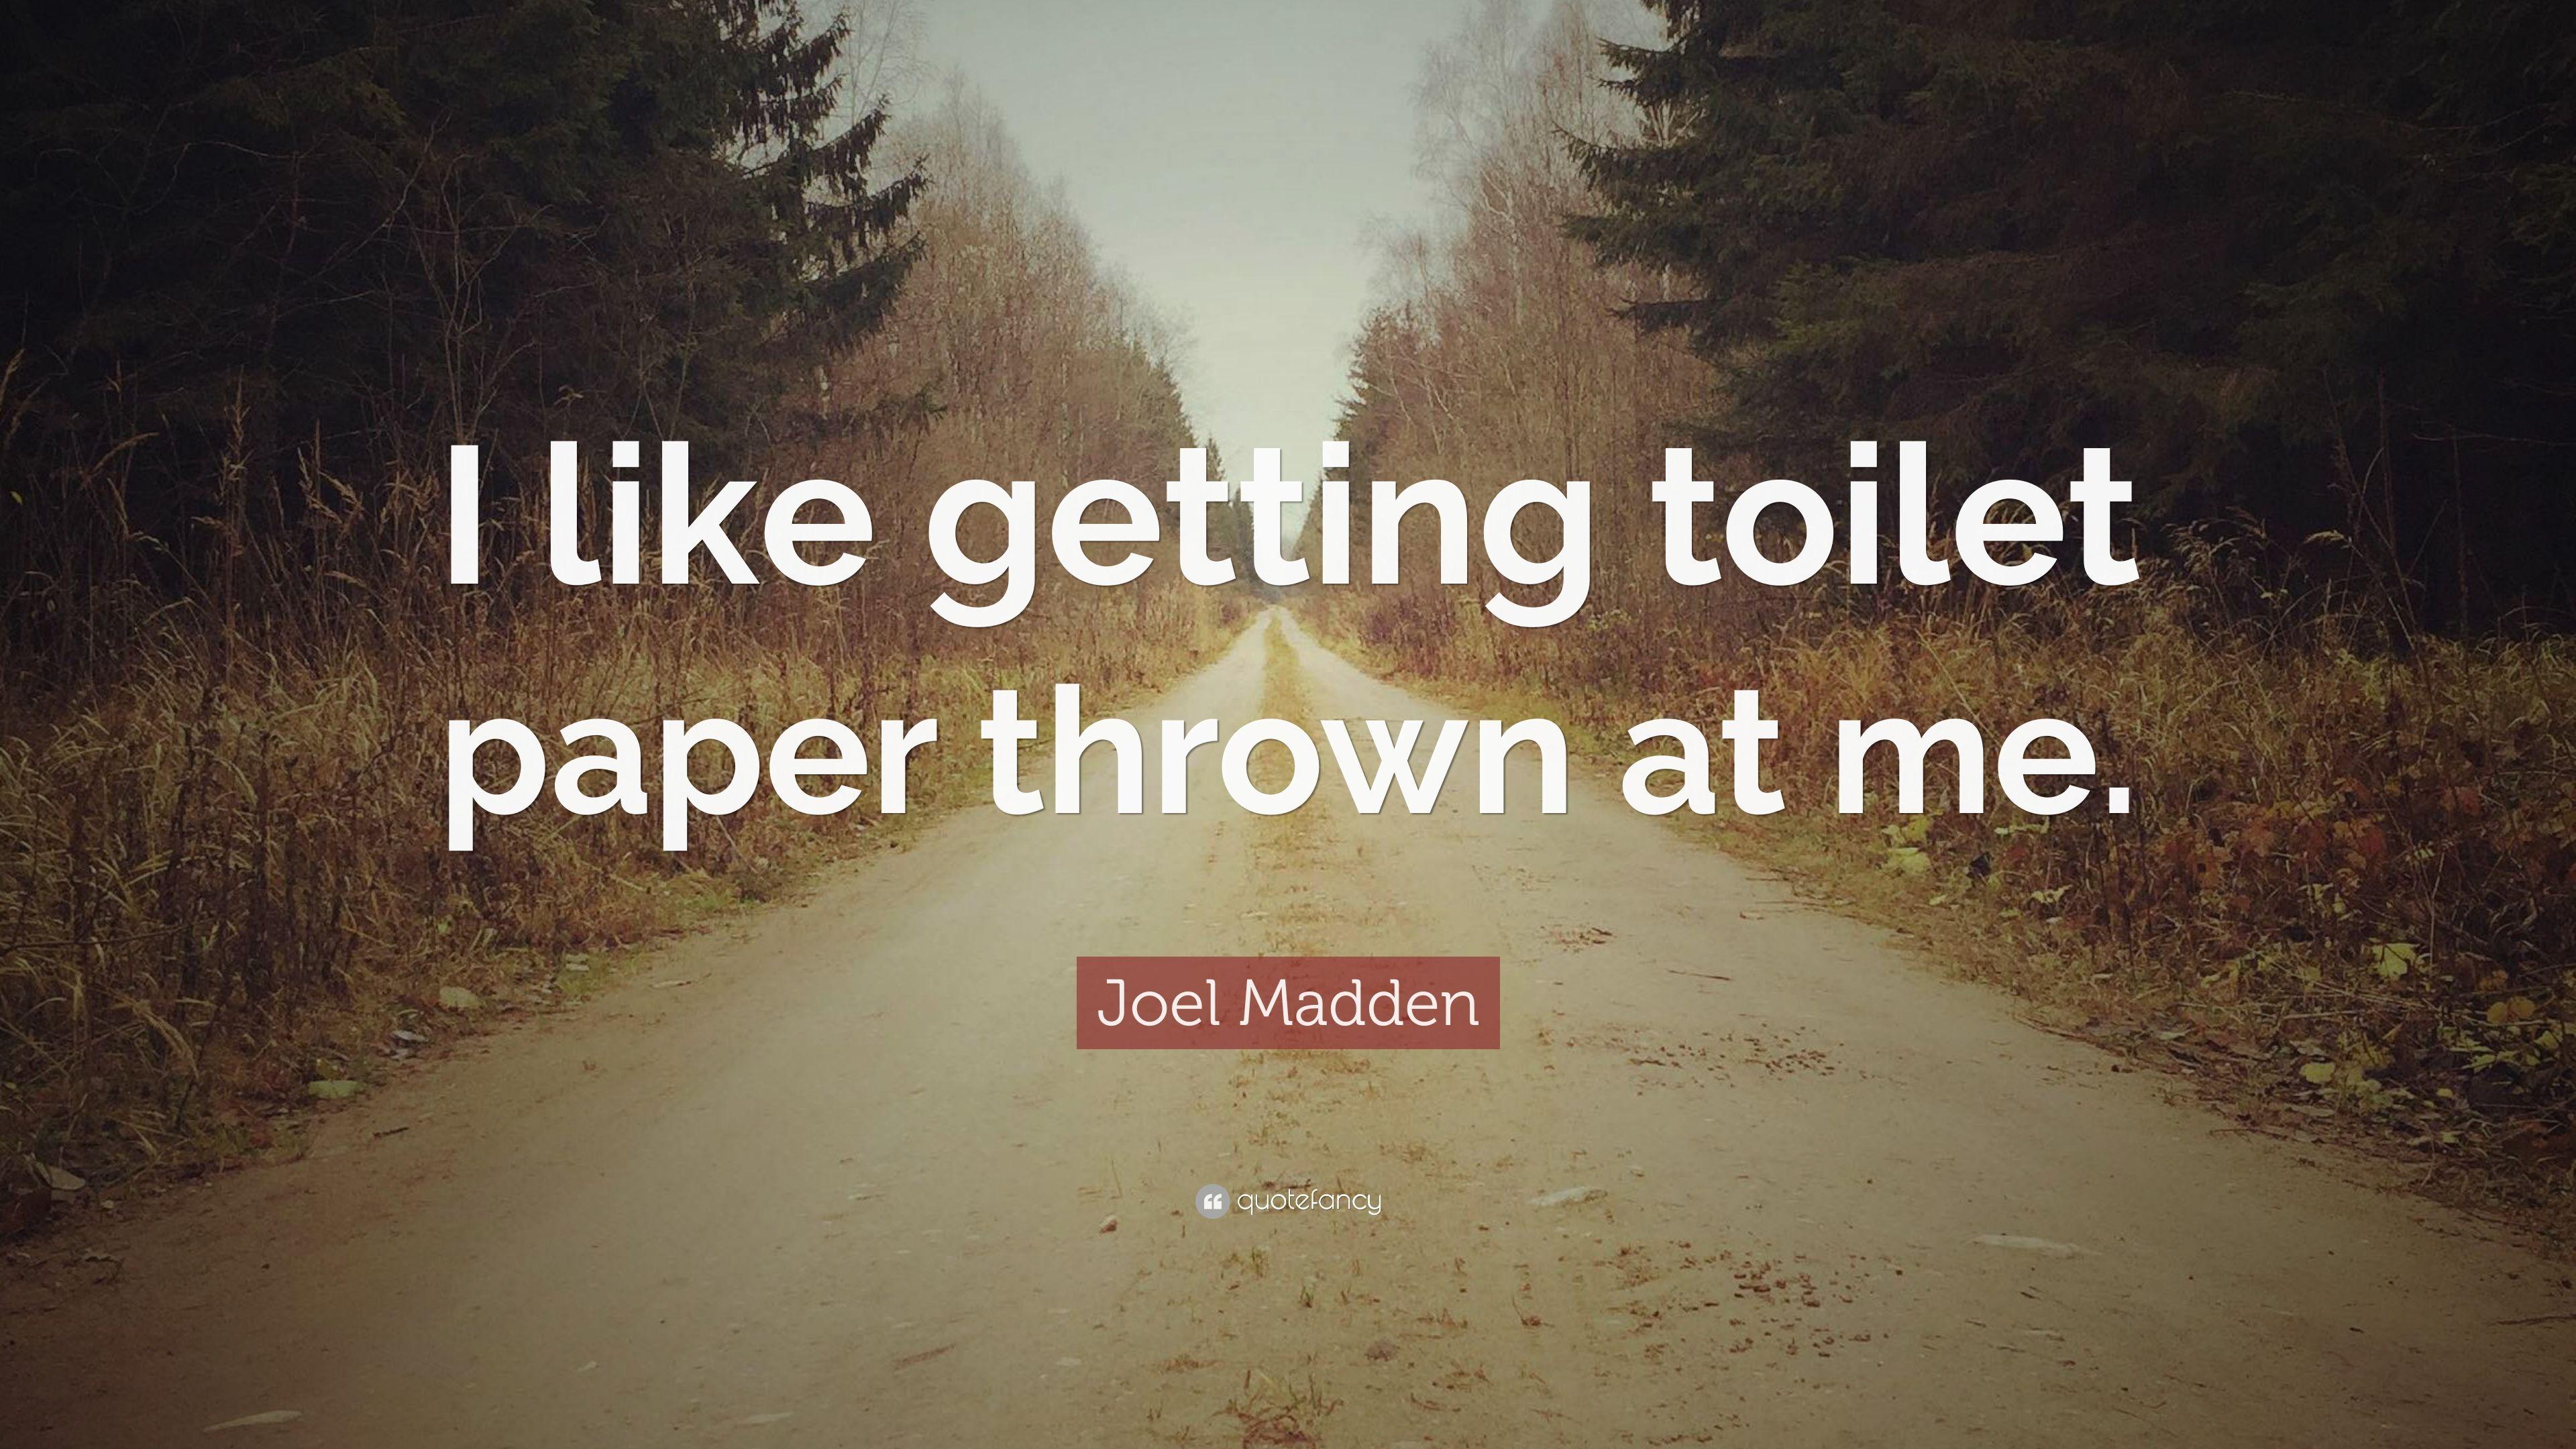 Joel Madden Quote: “I like getting toilet paper thrown at me.” 7